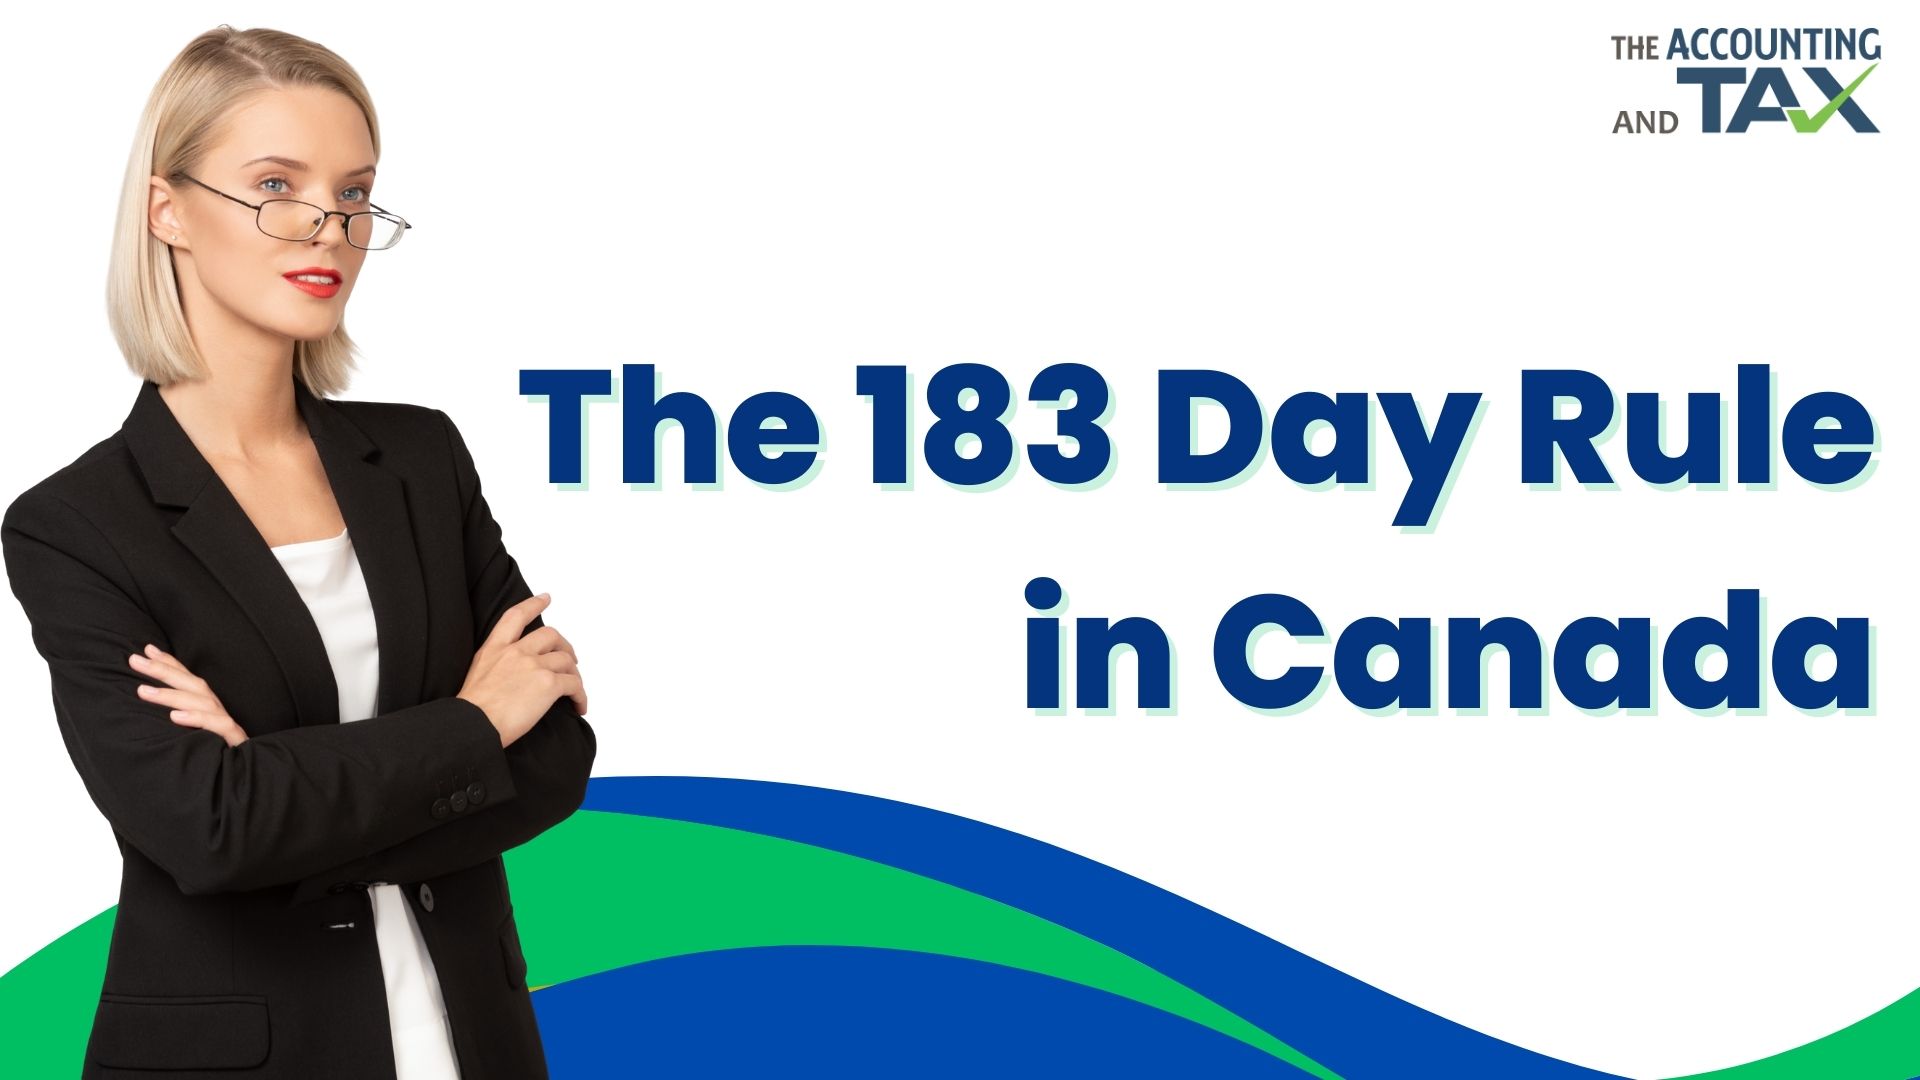 The 183 Day Rule in Canada